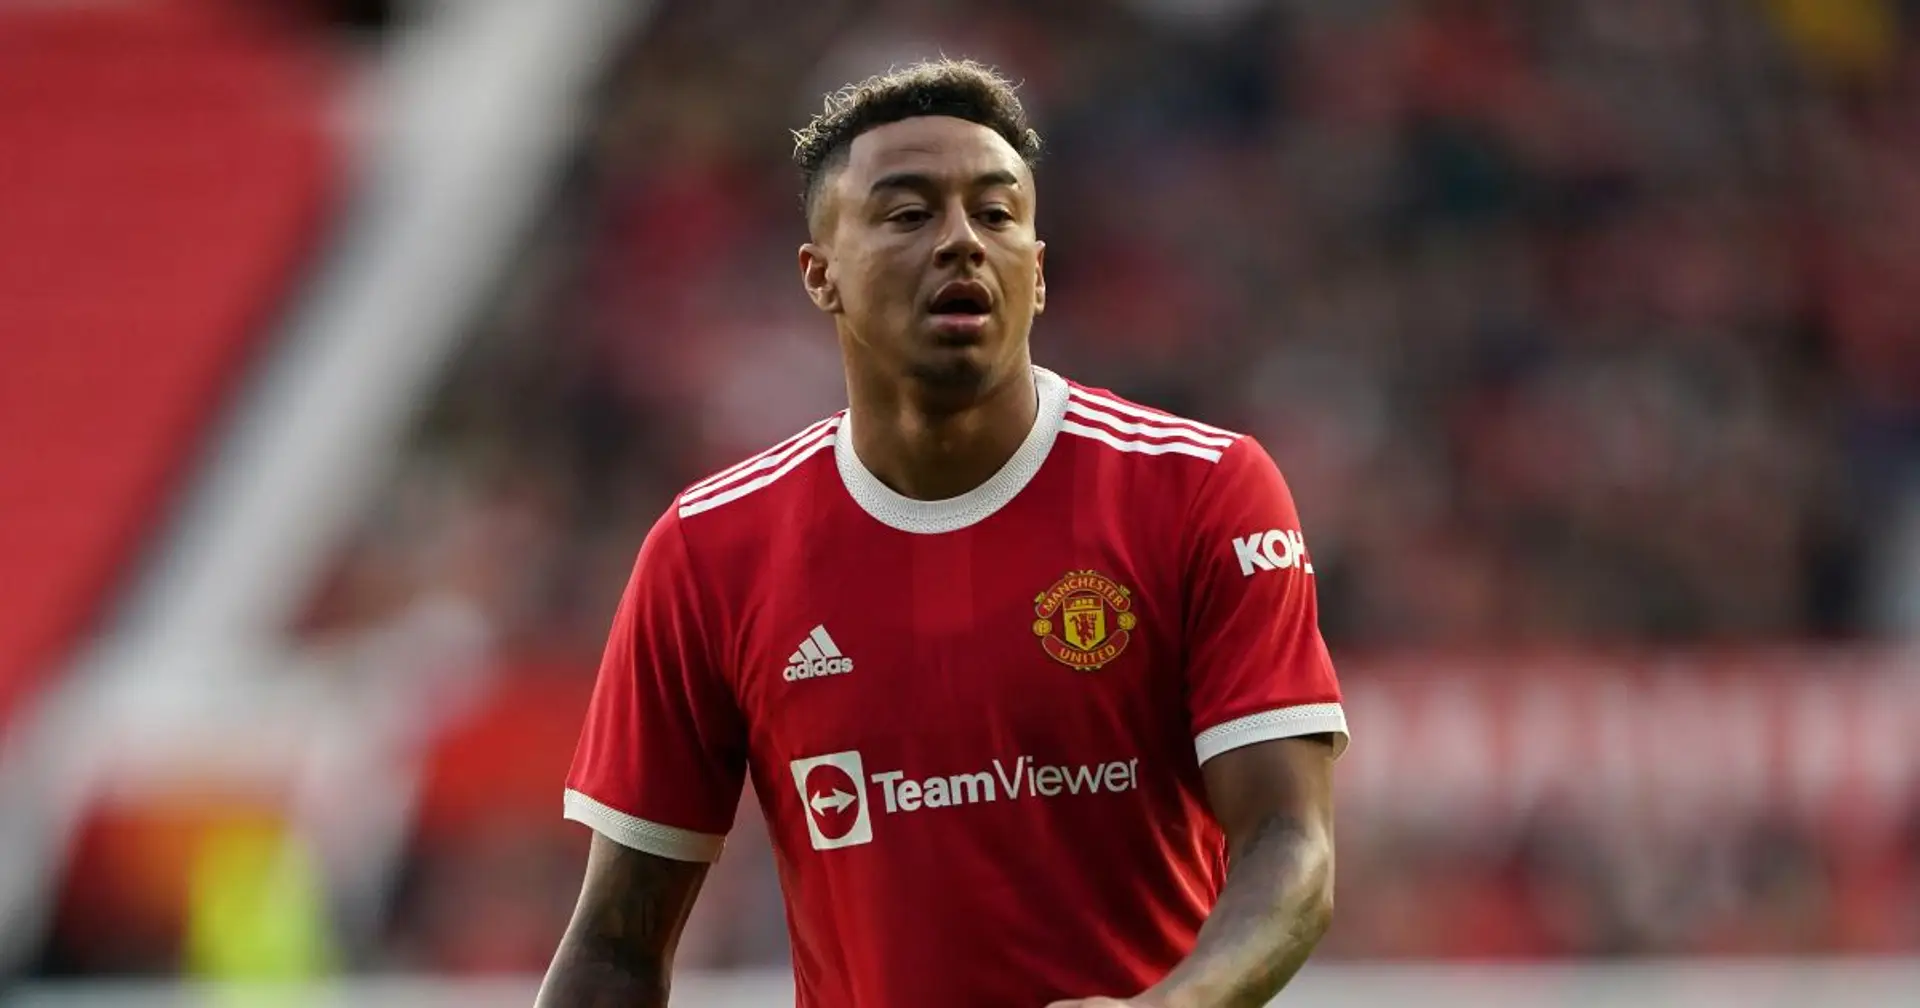 BREAKING: Jesse Lingard tests positive for Covid-19